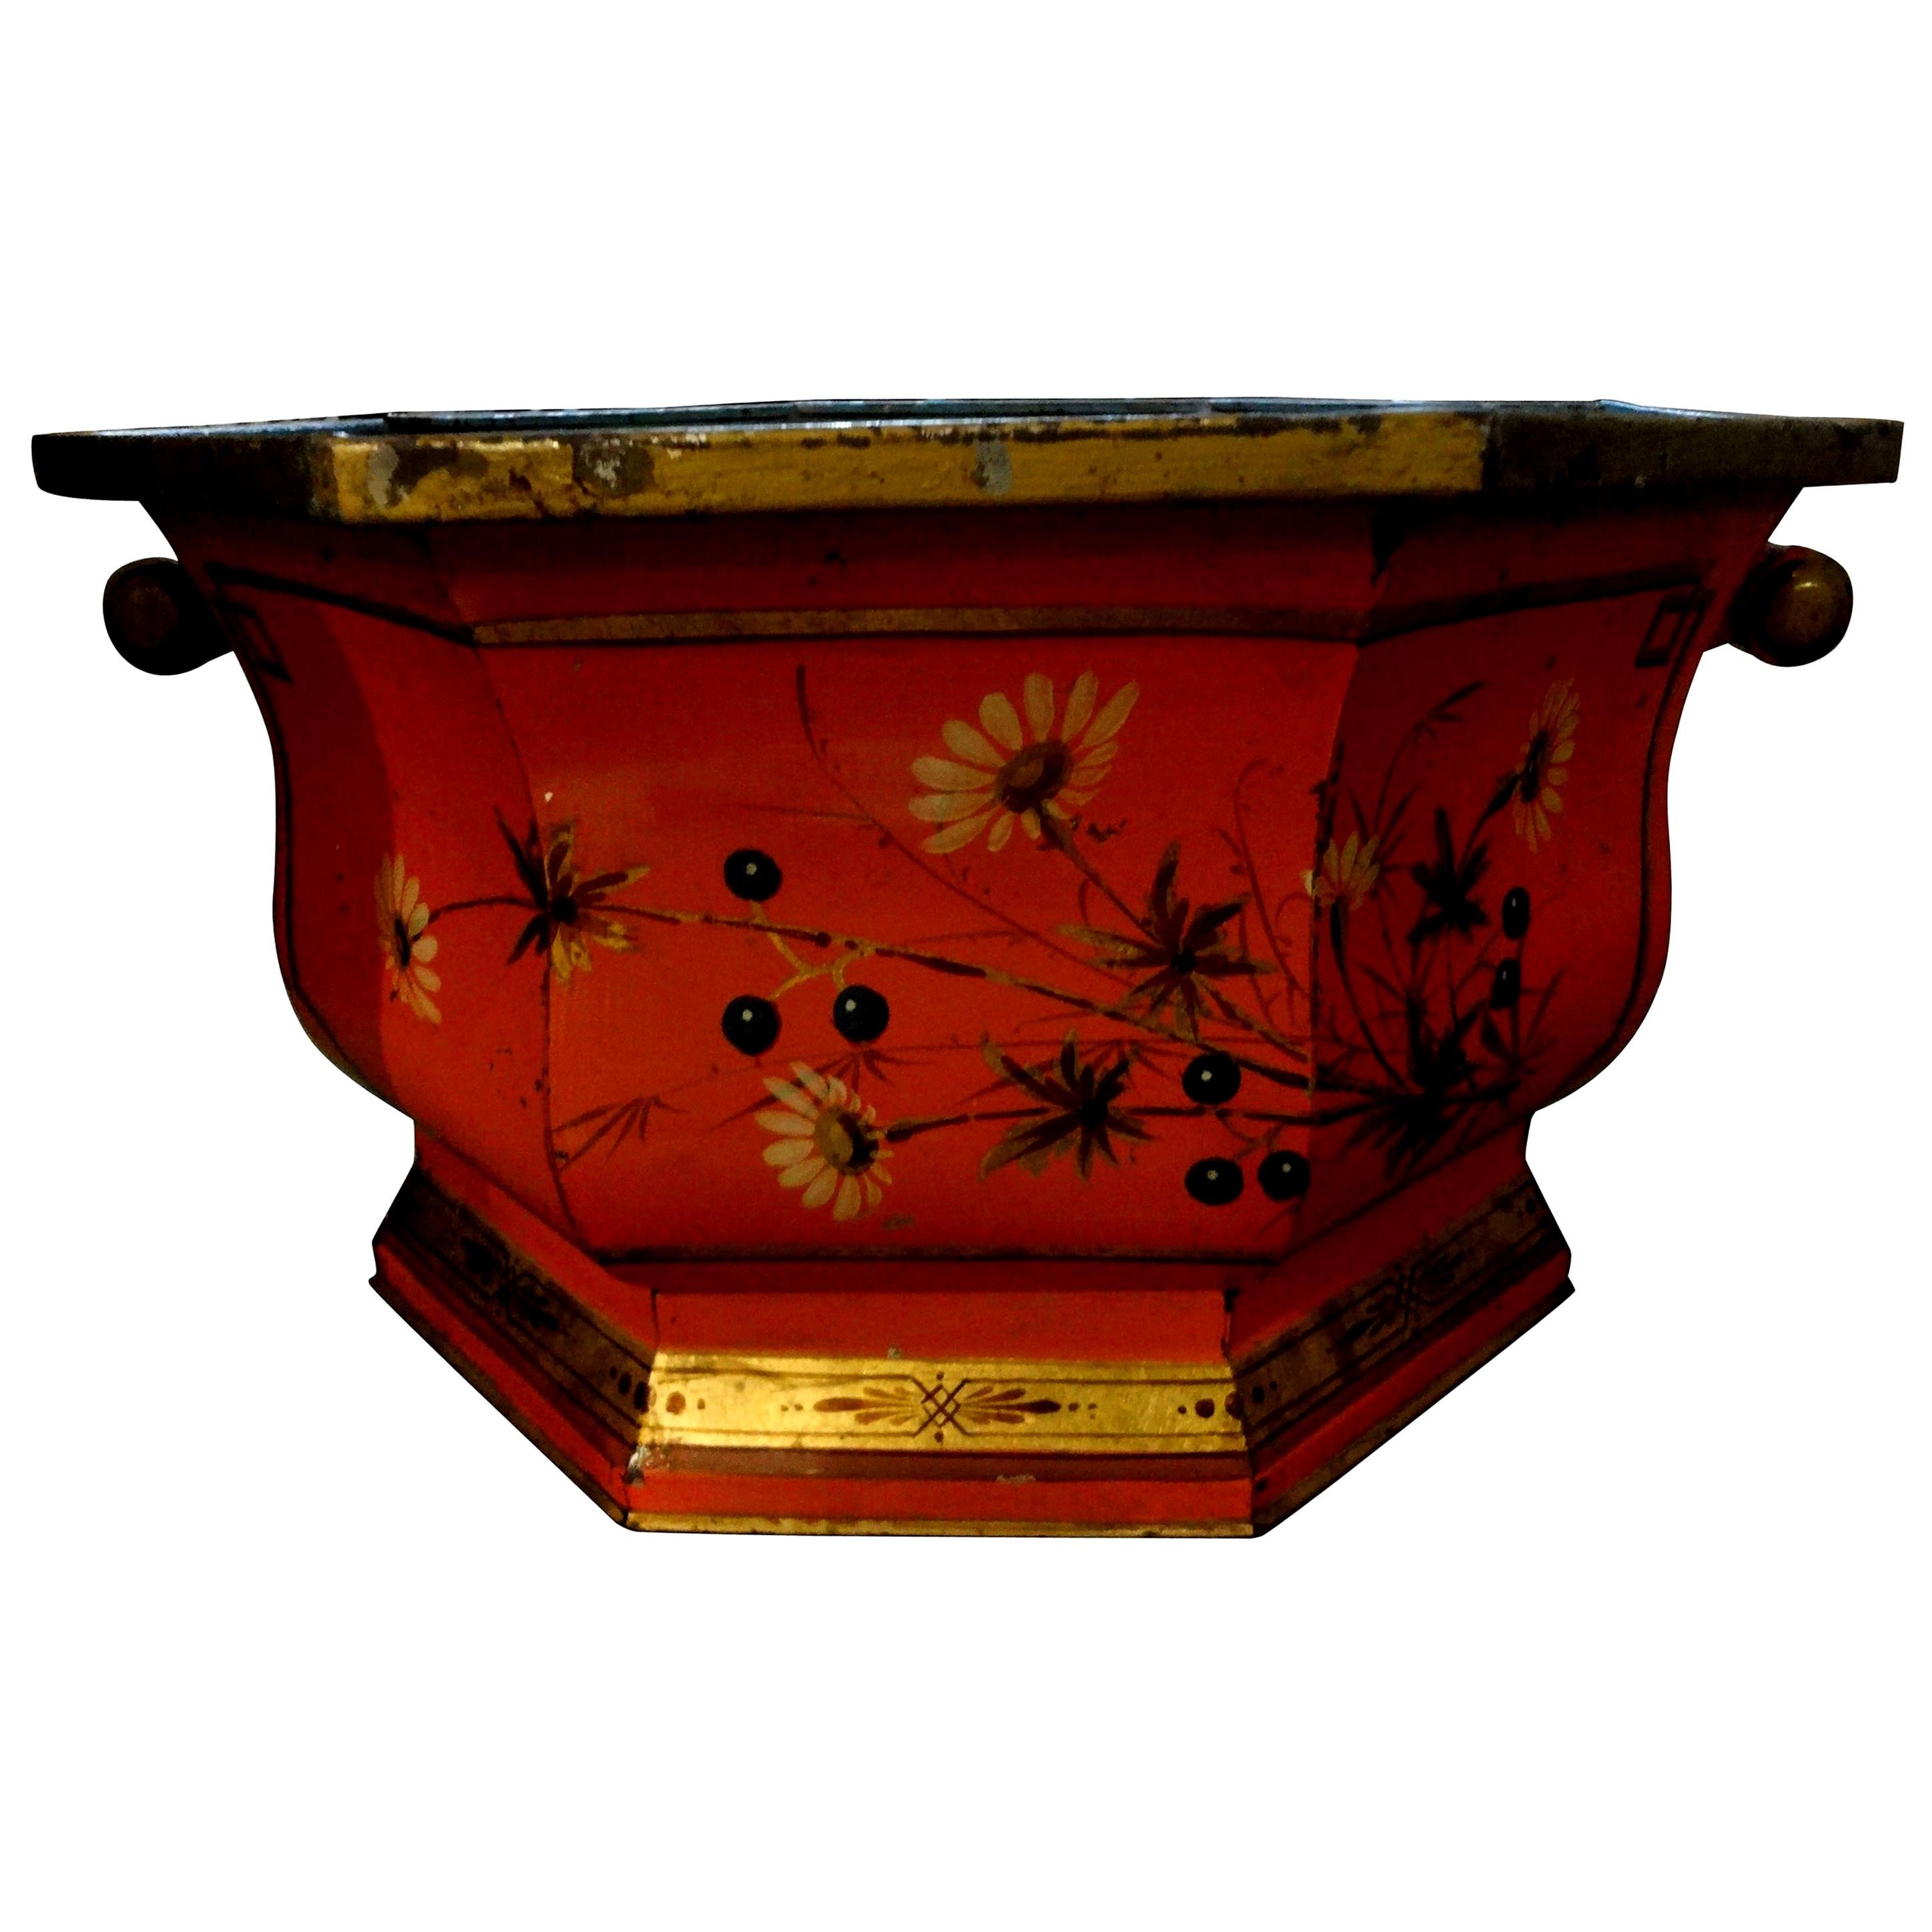 Large Italian Tole Painted and Gilt Decorated Jardinière or Cachepot